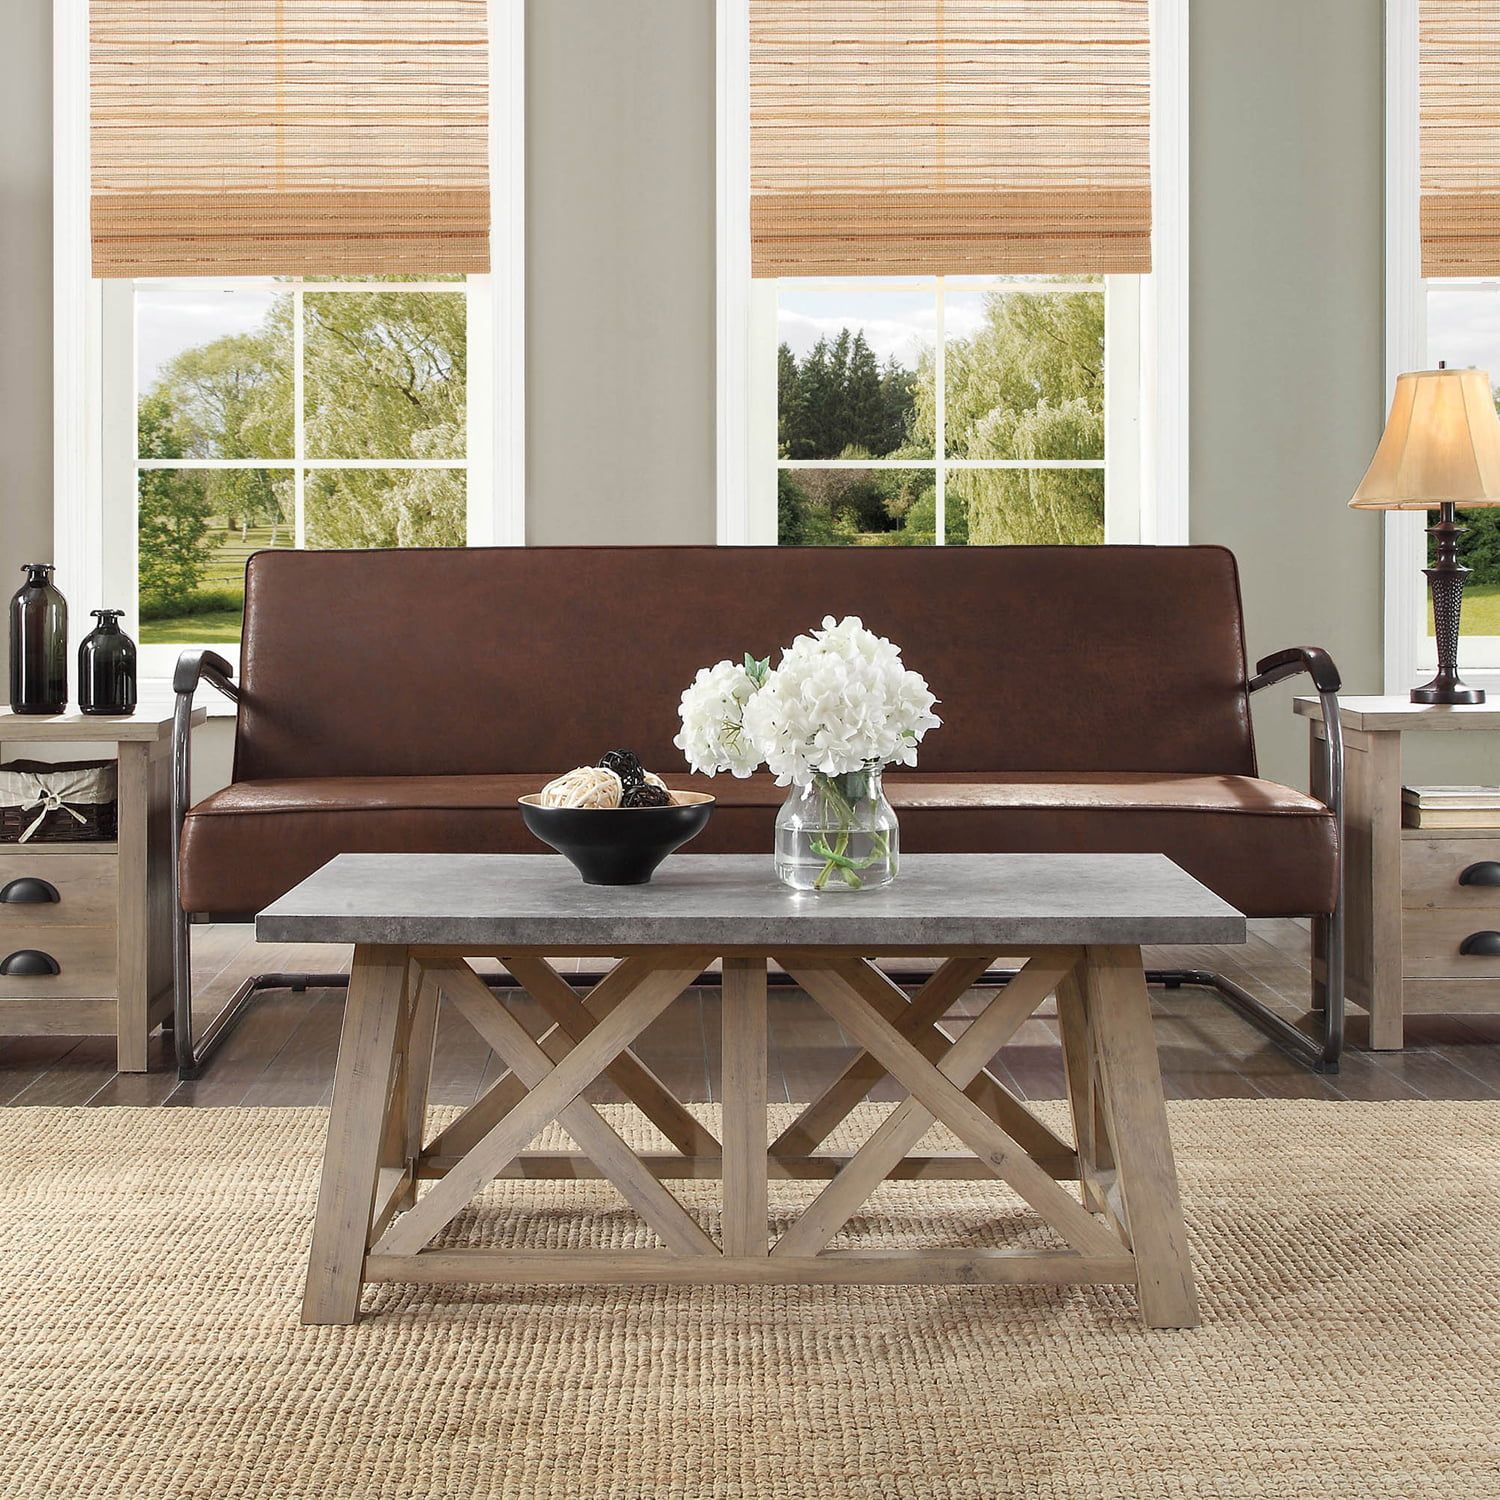 Better Homes & Gardens Granary Modern Farmhouse Coffee Table, Multiple For Modern Farmhouse Coffee Table Sets (View 2 of 15)